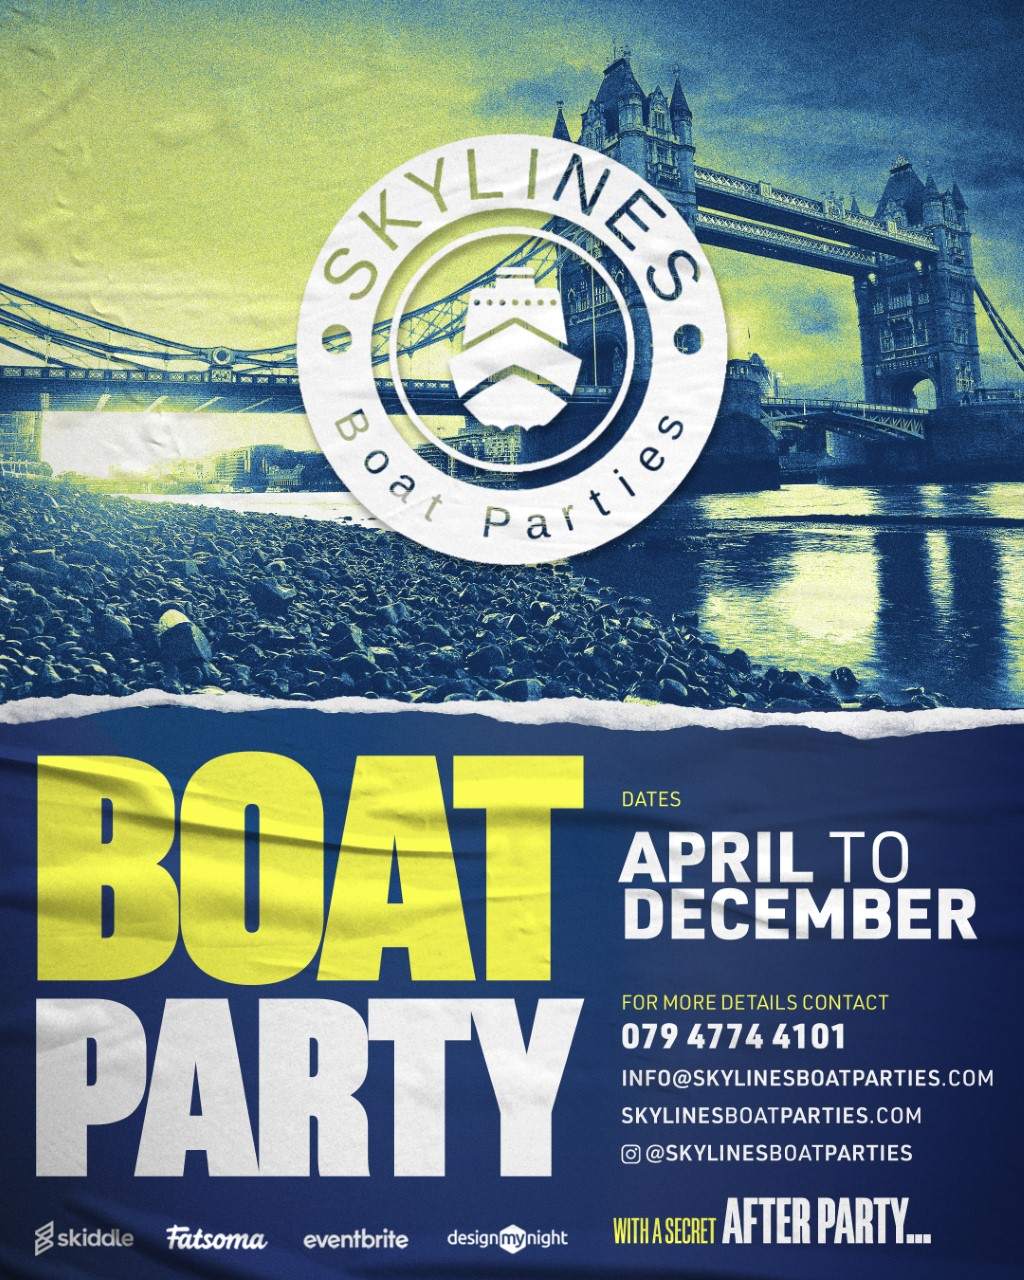 BOAT CELEBRATIONS ON THE THAMES WITH A SECRET AFTER PARTY AT EGG LONDON - Página frontal